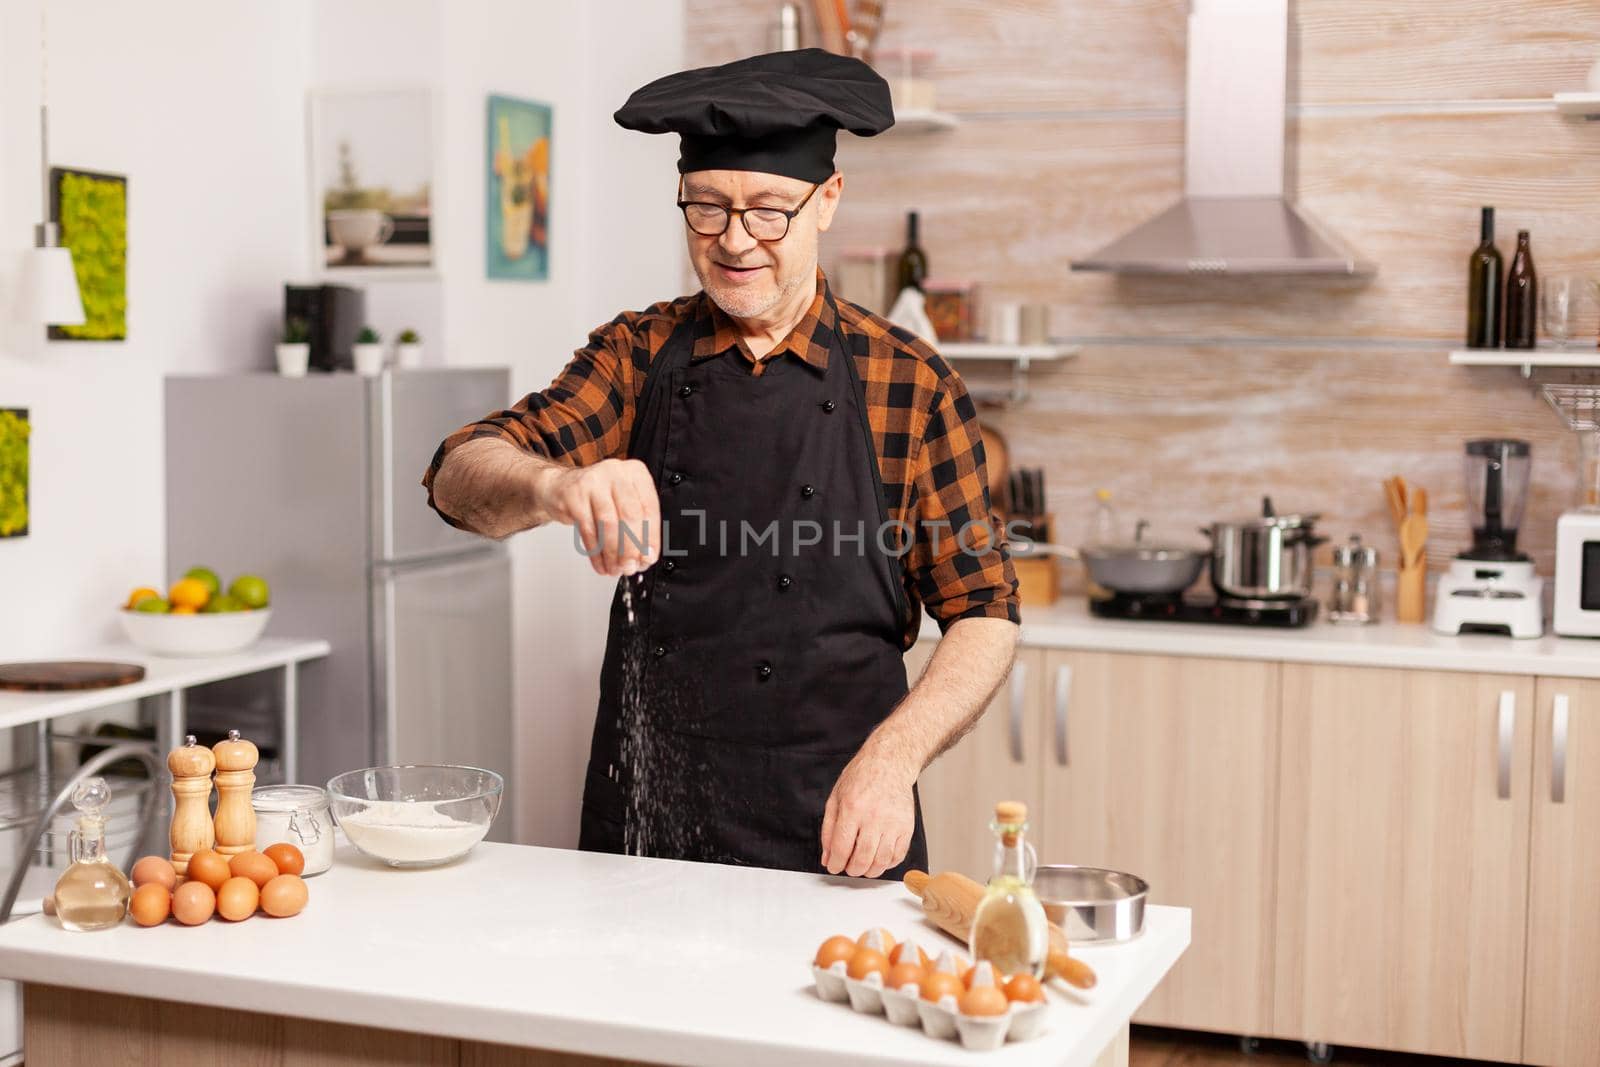 Experienced baker in kitchen preparing delicious pizza using bio wheat flour. Retired senior chef with bonete and apron, in kitchen uniform sprinkling sieving sifting ingredients by hand.